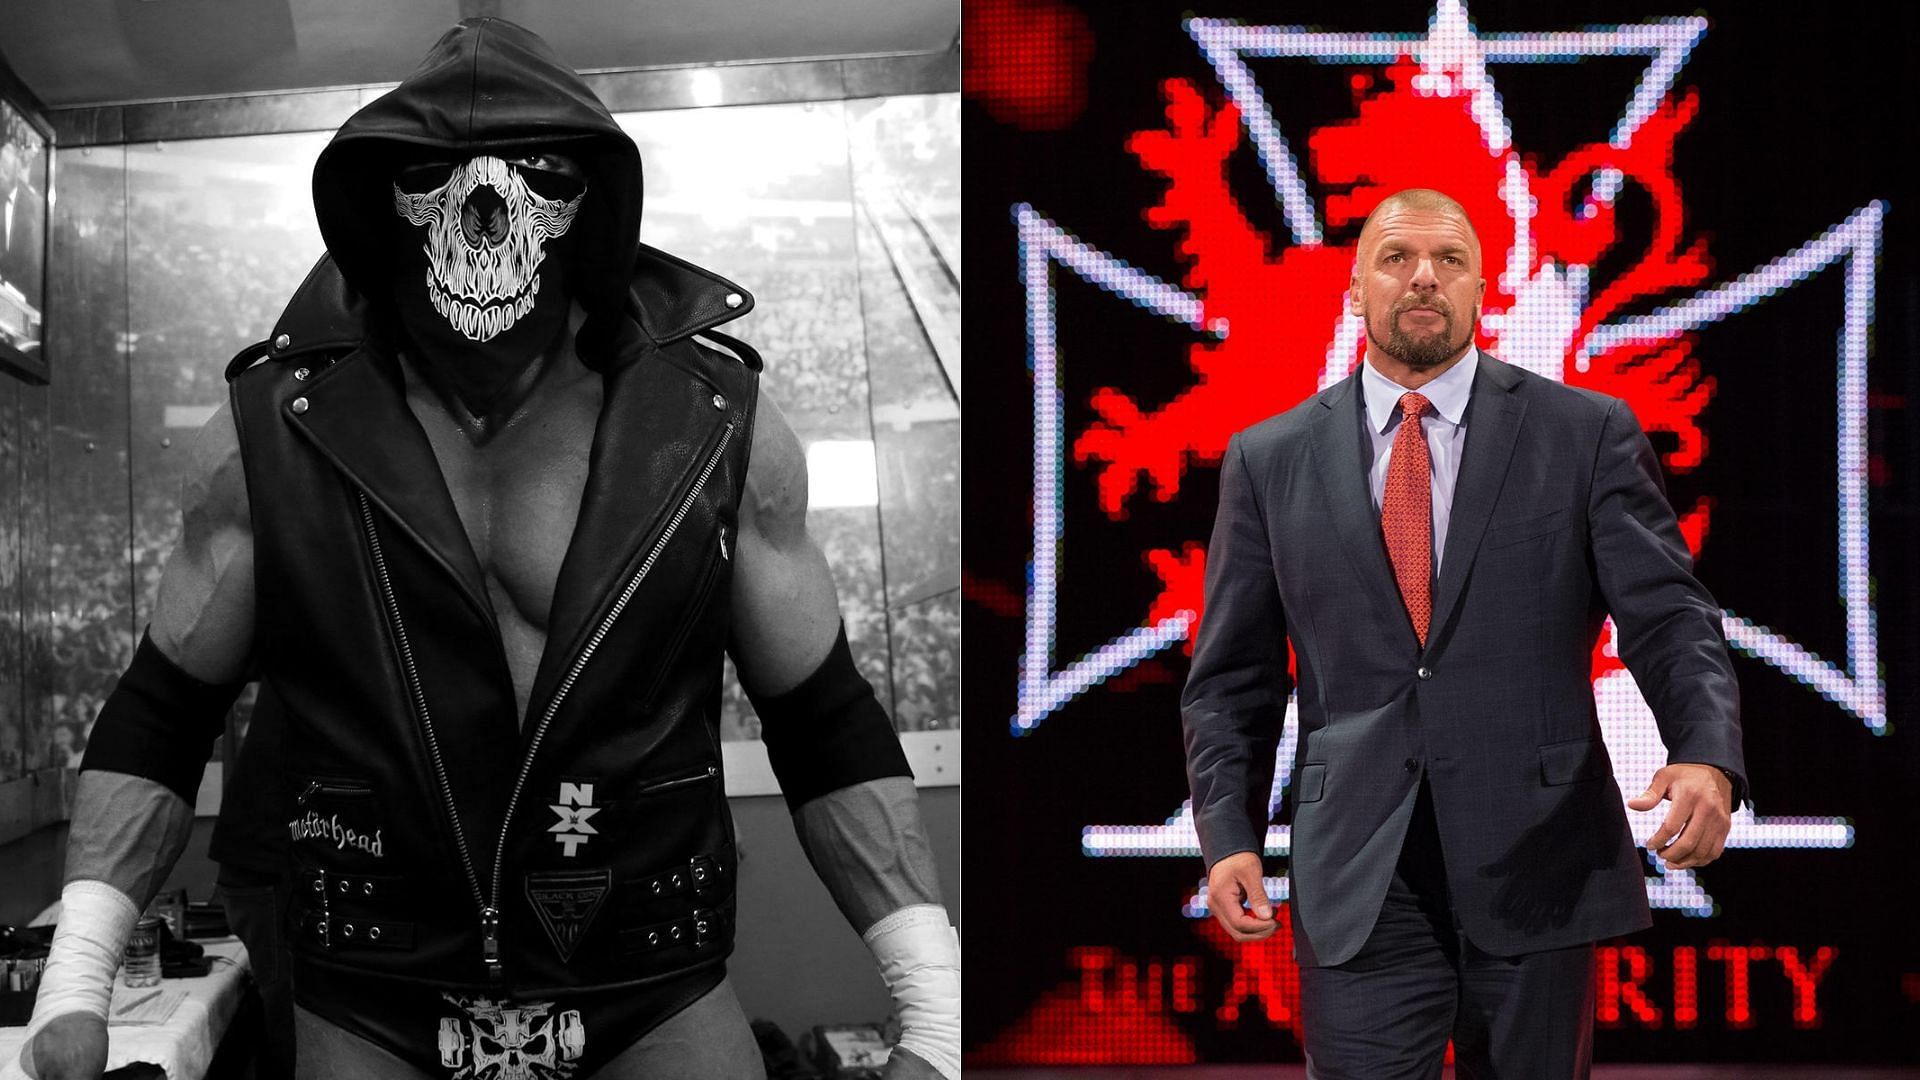 WWE Chief Content Officer Triple H aka Hunter Hearst Helmsley